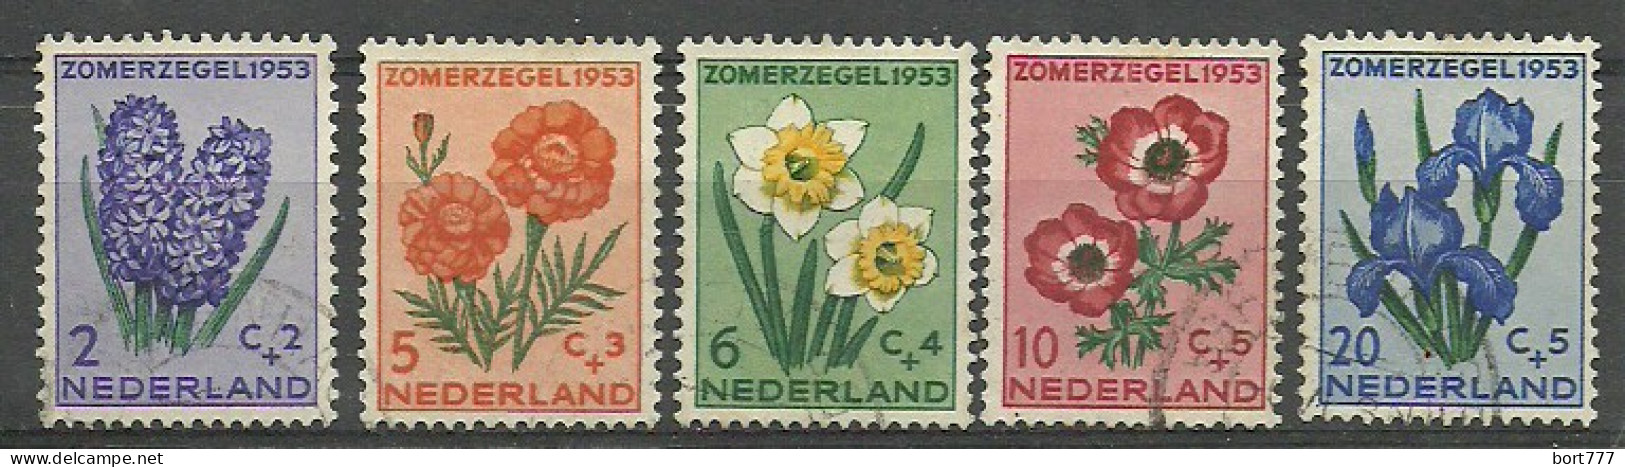 Netherlands 1953 Year, Used Stamps ,Mi 607-11 Flowers - Used Stamps